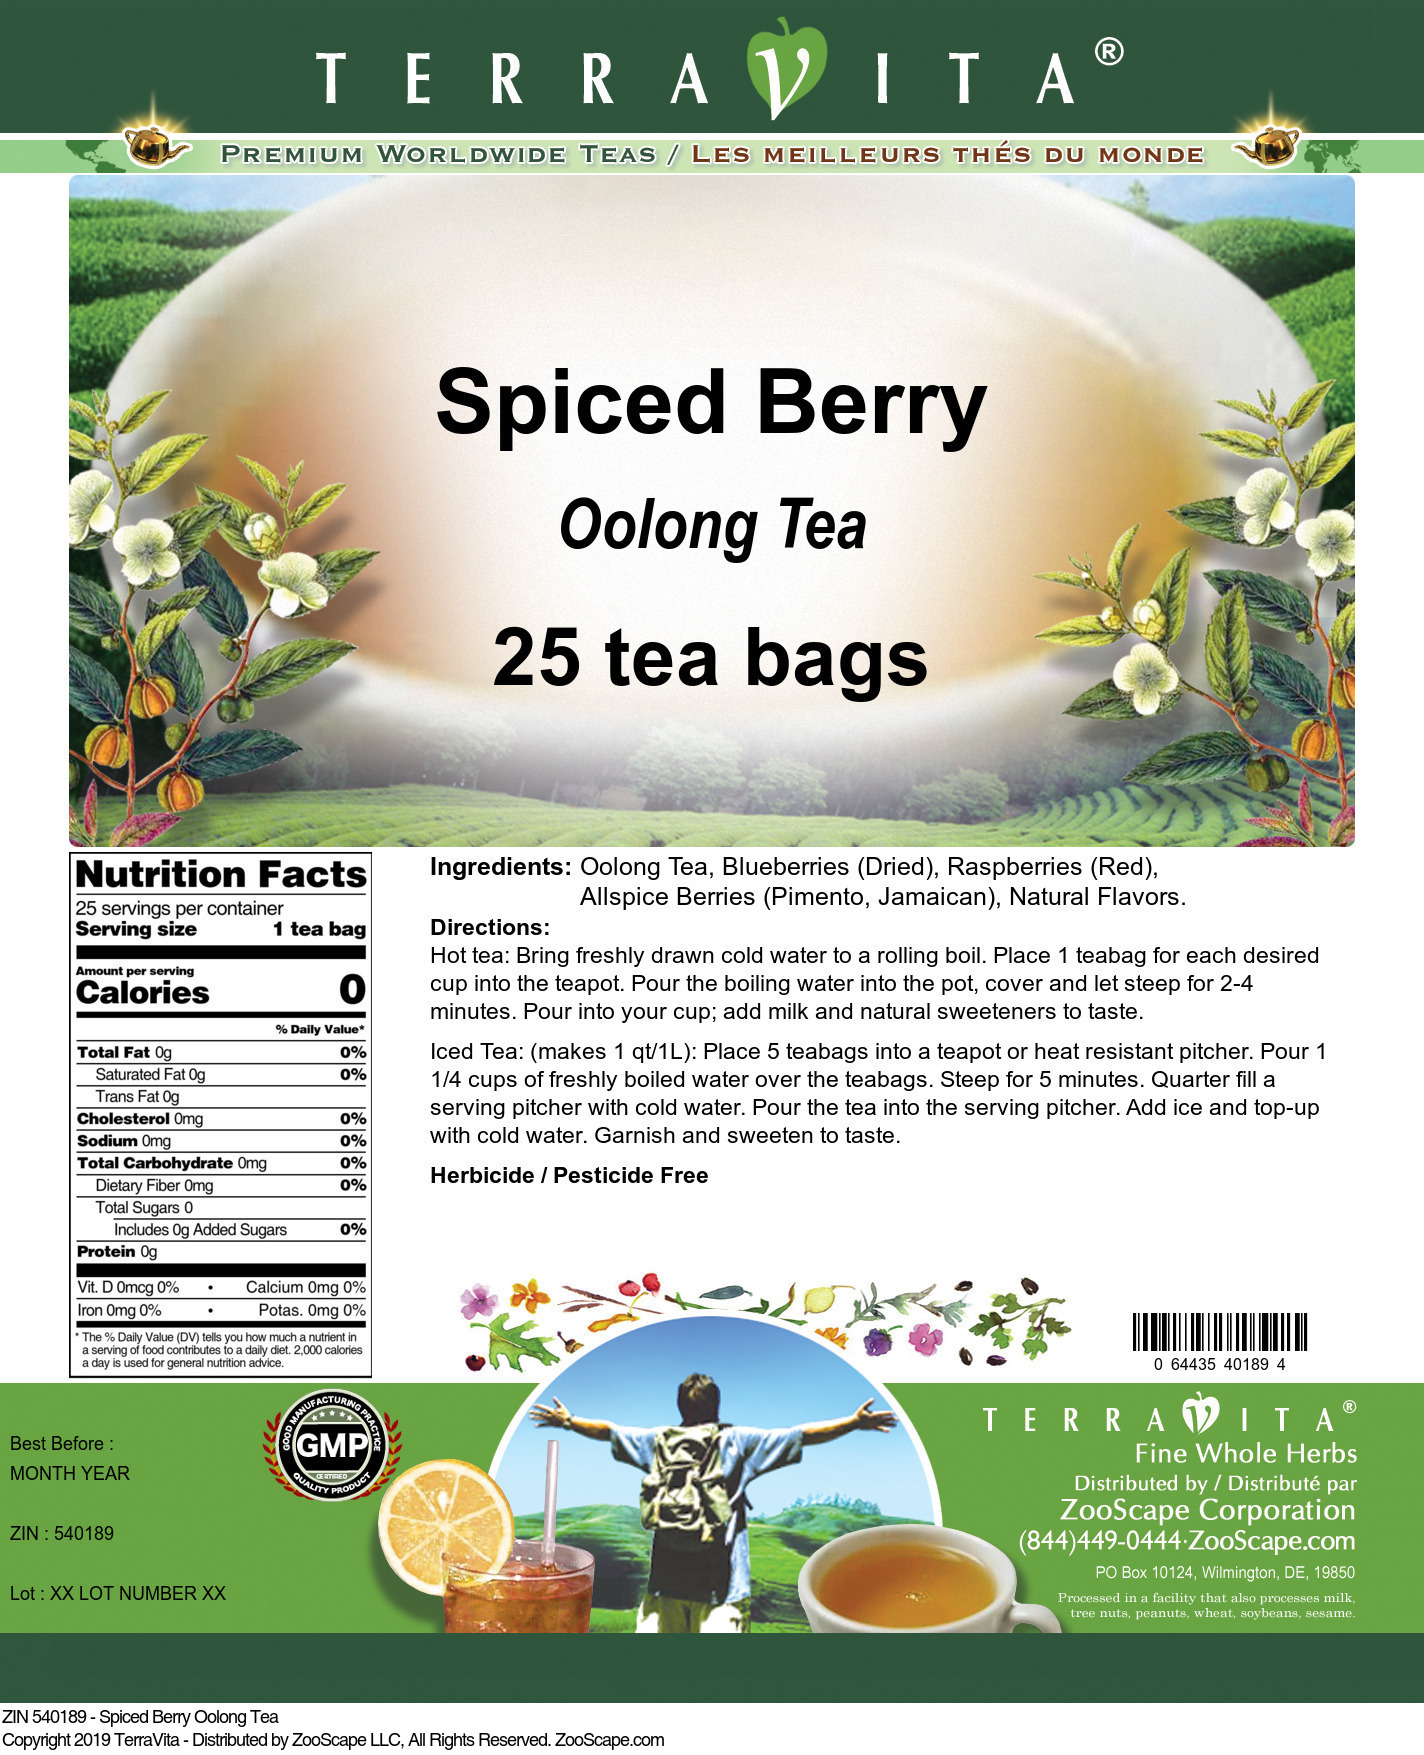 Spiced Berry Oolong Tea - Label